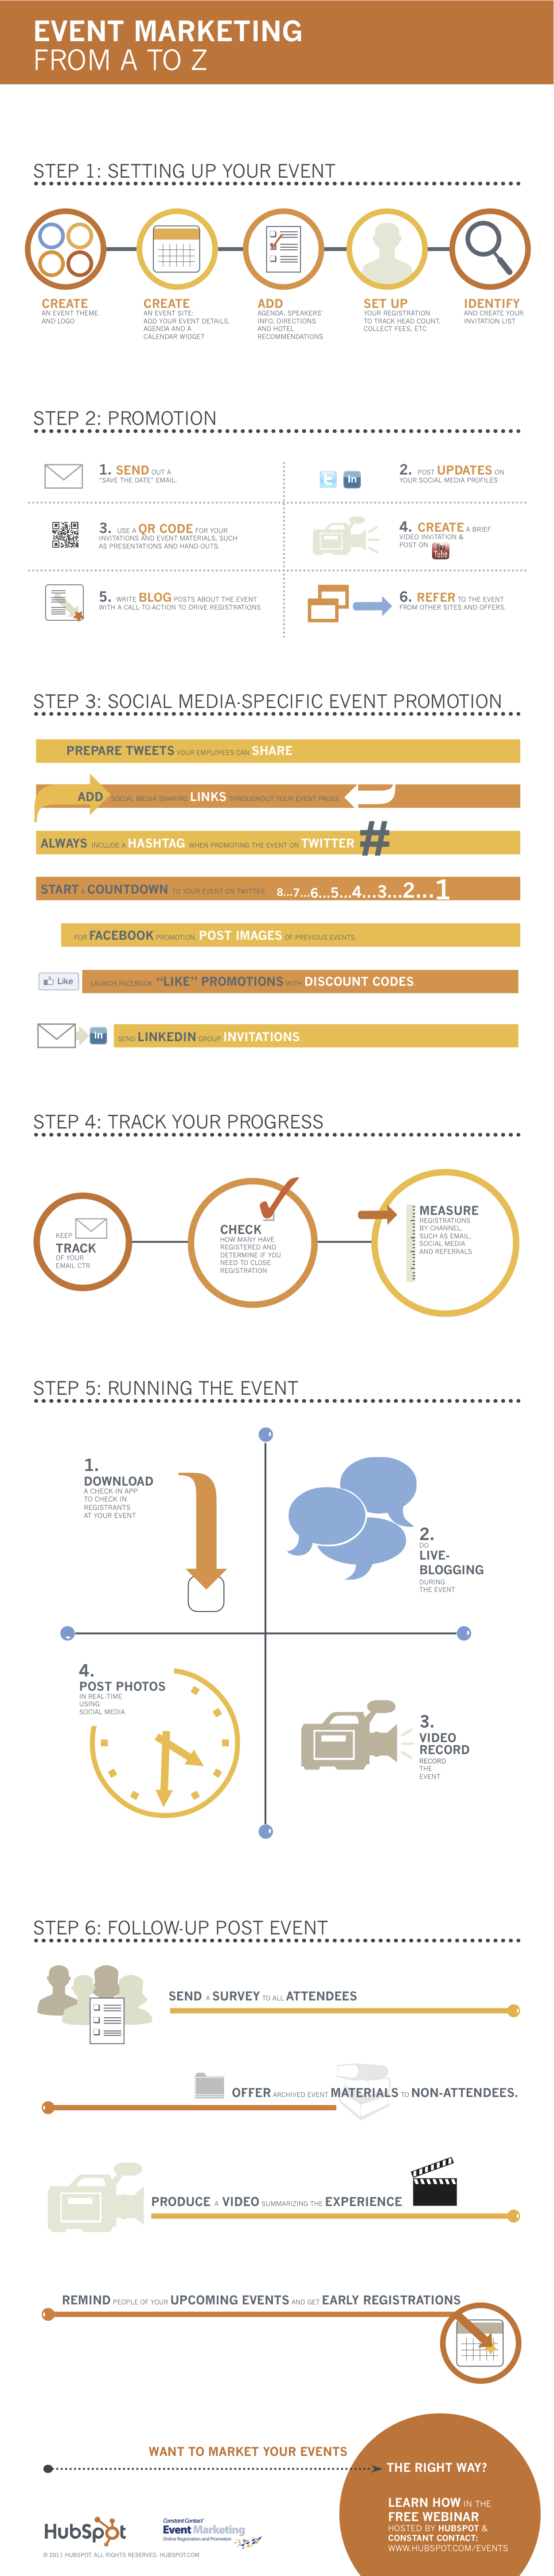 Event Marketing From A to Z [Infographic]